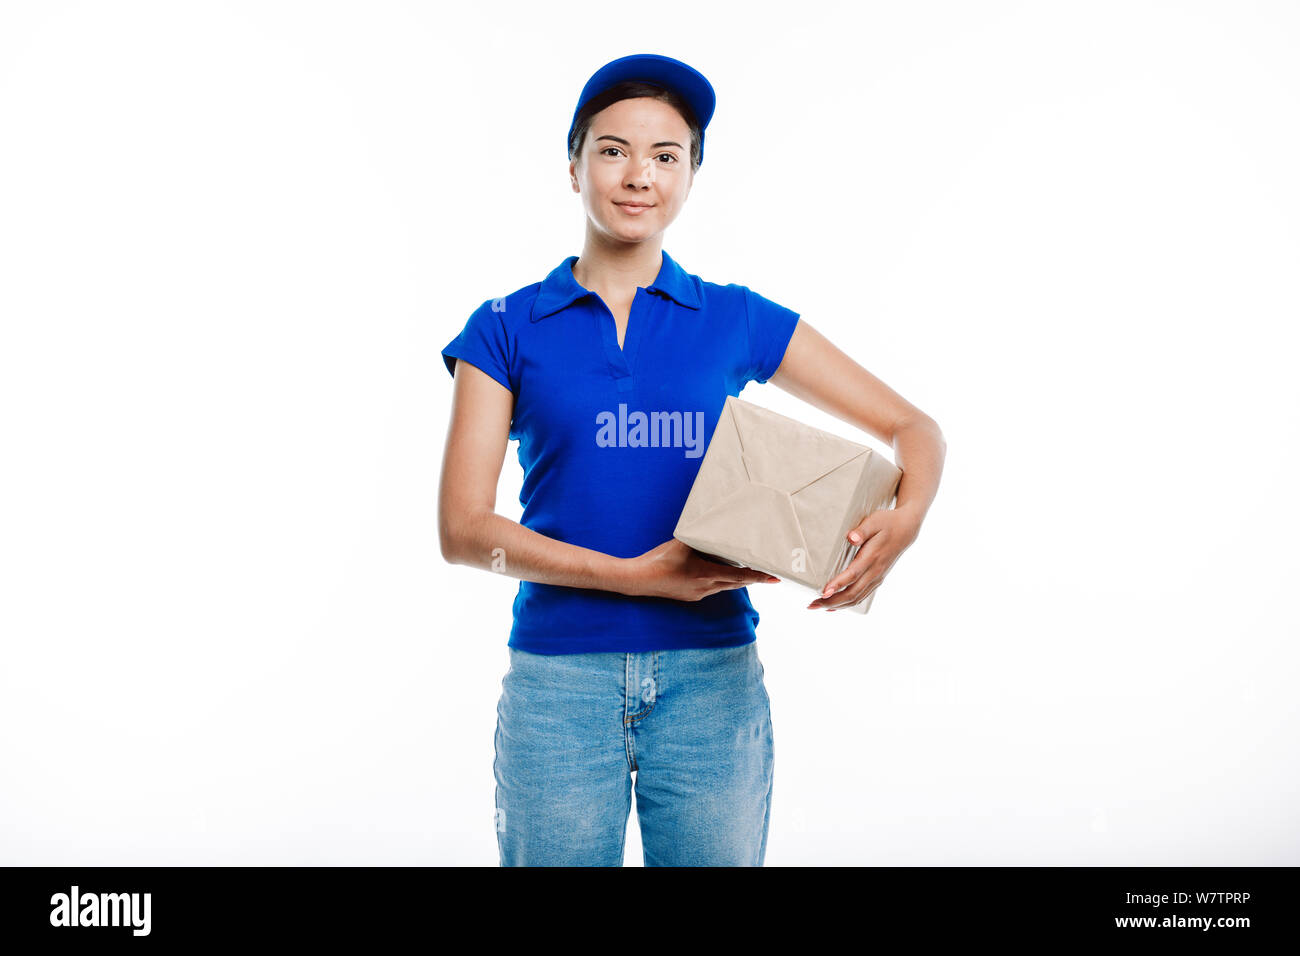 Girl working in deivery service poses at the camera. Stock Photo